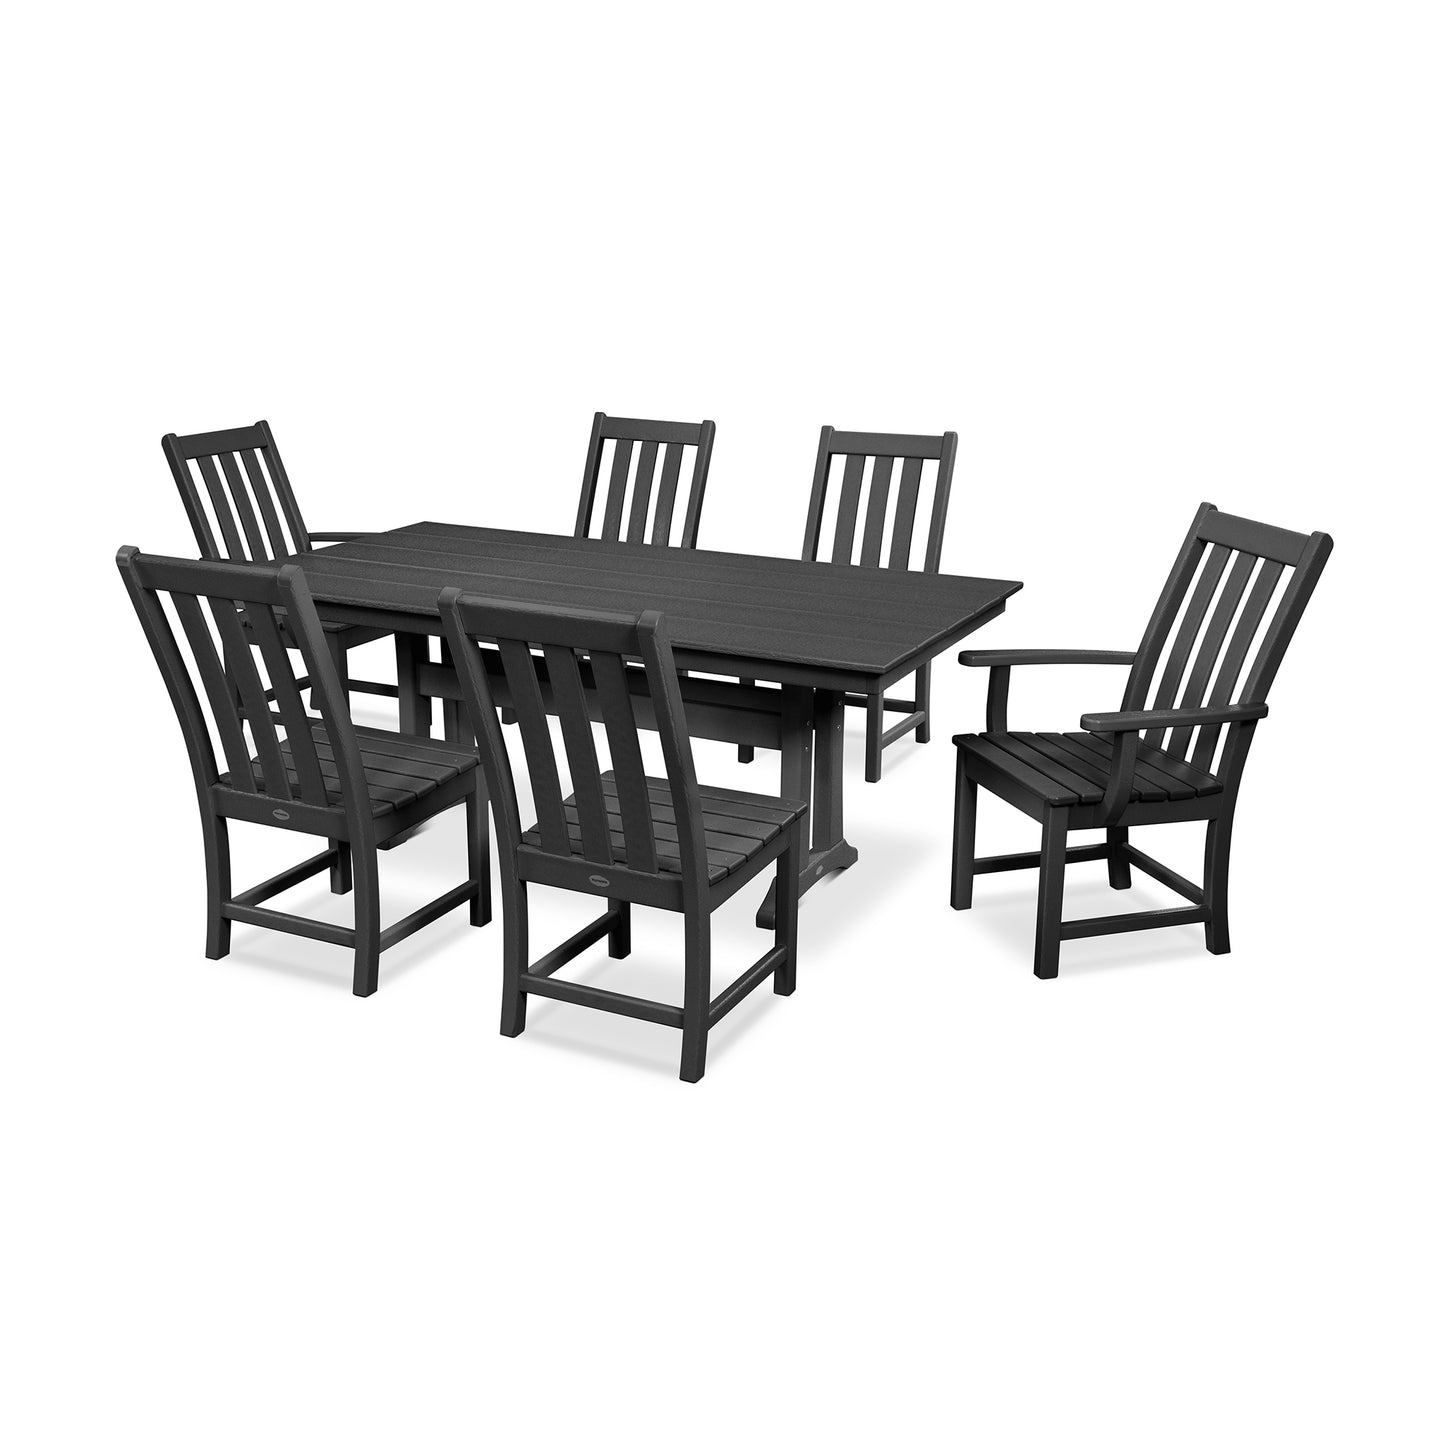 A modern outdoor dining set comprising a rectangular table and six chairs, all crafted in dark grey POLYWOOD Vineyard, with a slatted design, on a plain white background.